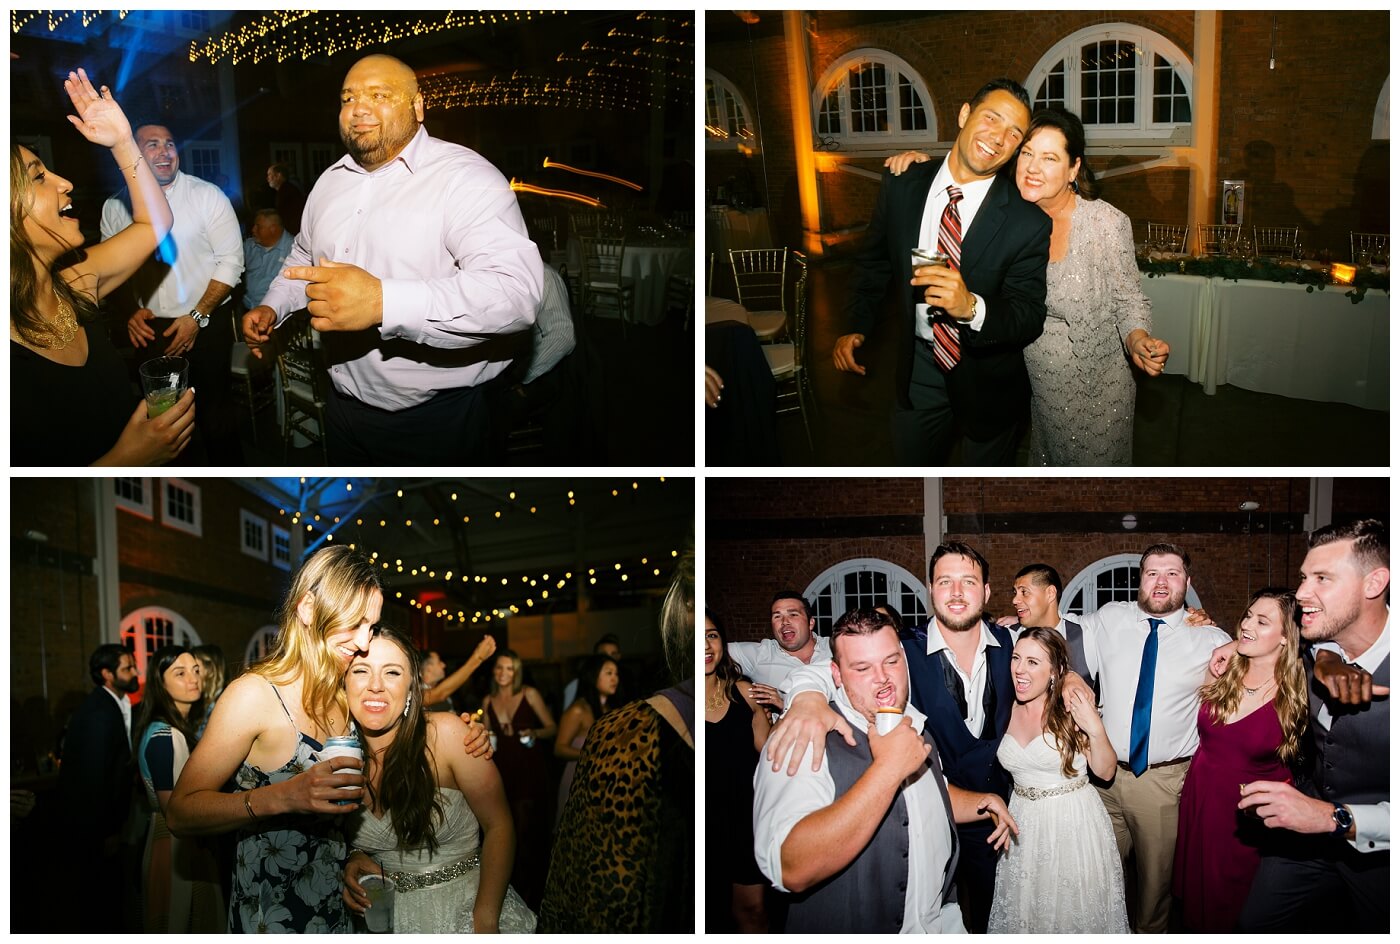 Wedding Reception at BRICK San Diego. Night photos of people dancing and wedding details